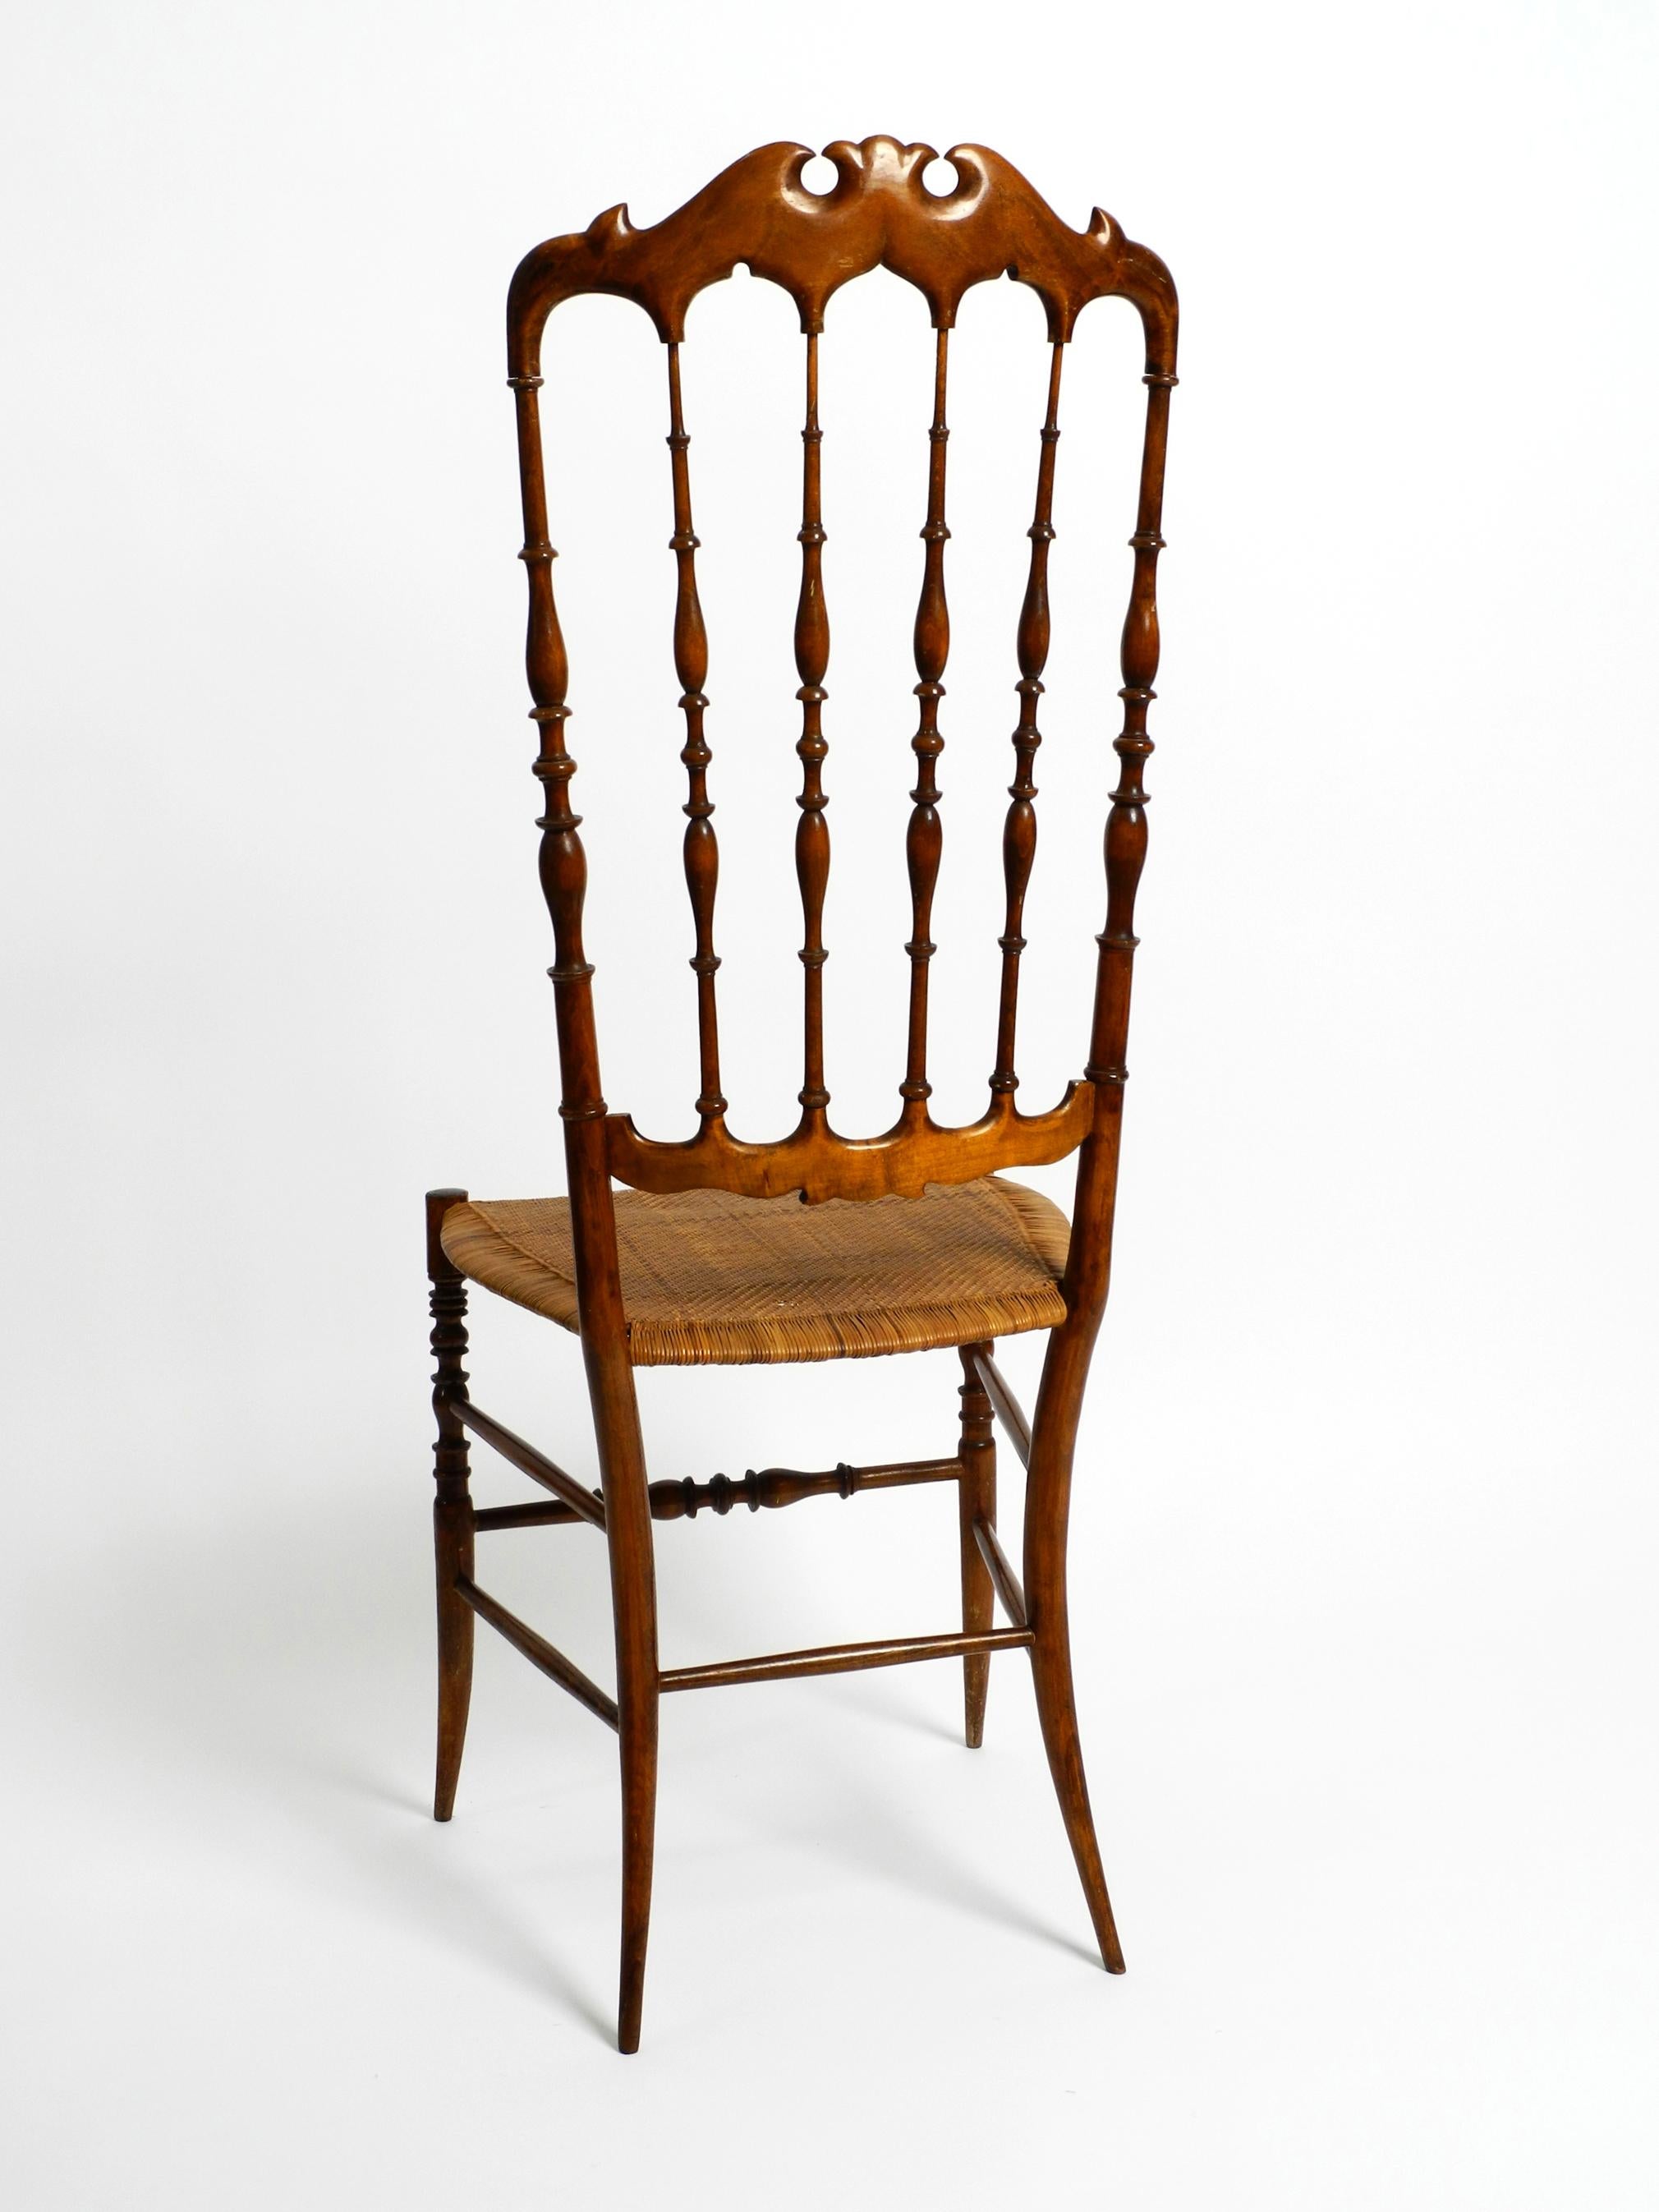 Extremely rare Mid Century Italian walnut Chiavari chair with wicker seat and high backrest.
Related to the design of Giuseppe Gaetano Descalzi.
Descalzi (1767-1855) was a Genoese furniture maker best known for inventing the Chiavari chair. He was